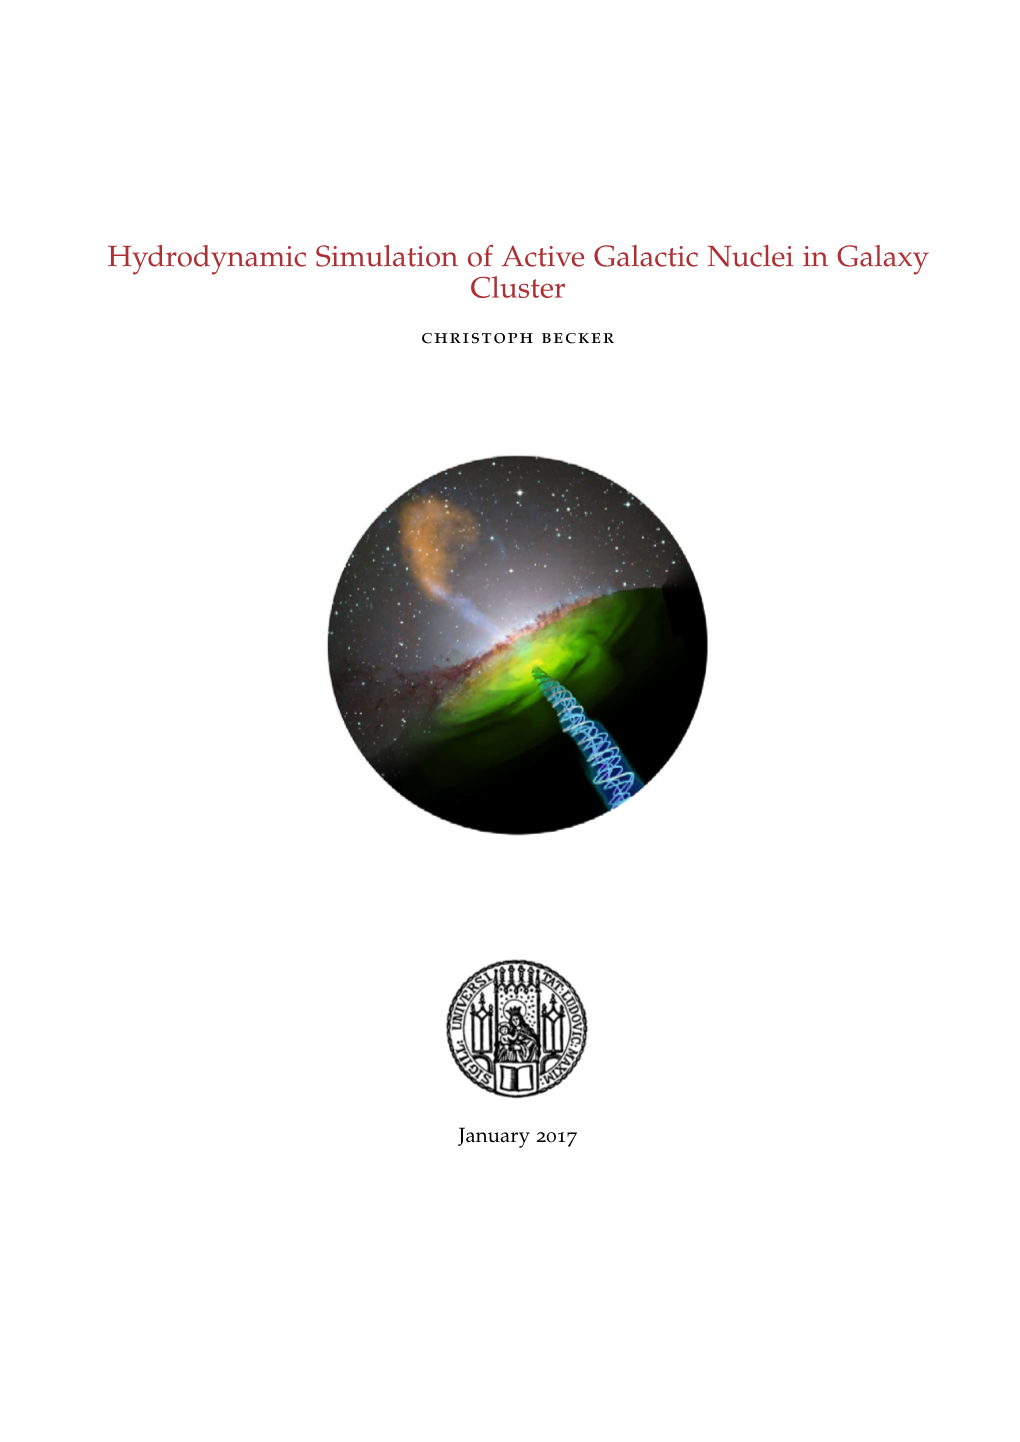 Hydrodynamic Simulation of Active Galactic Nuclei in Galaxy Cluster